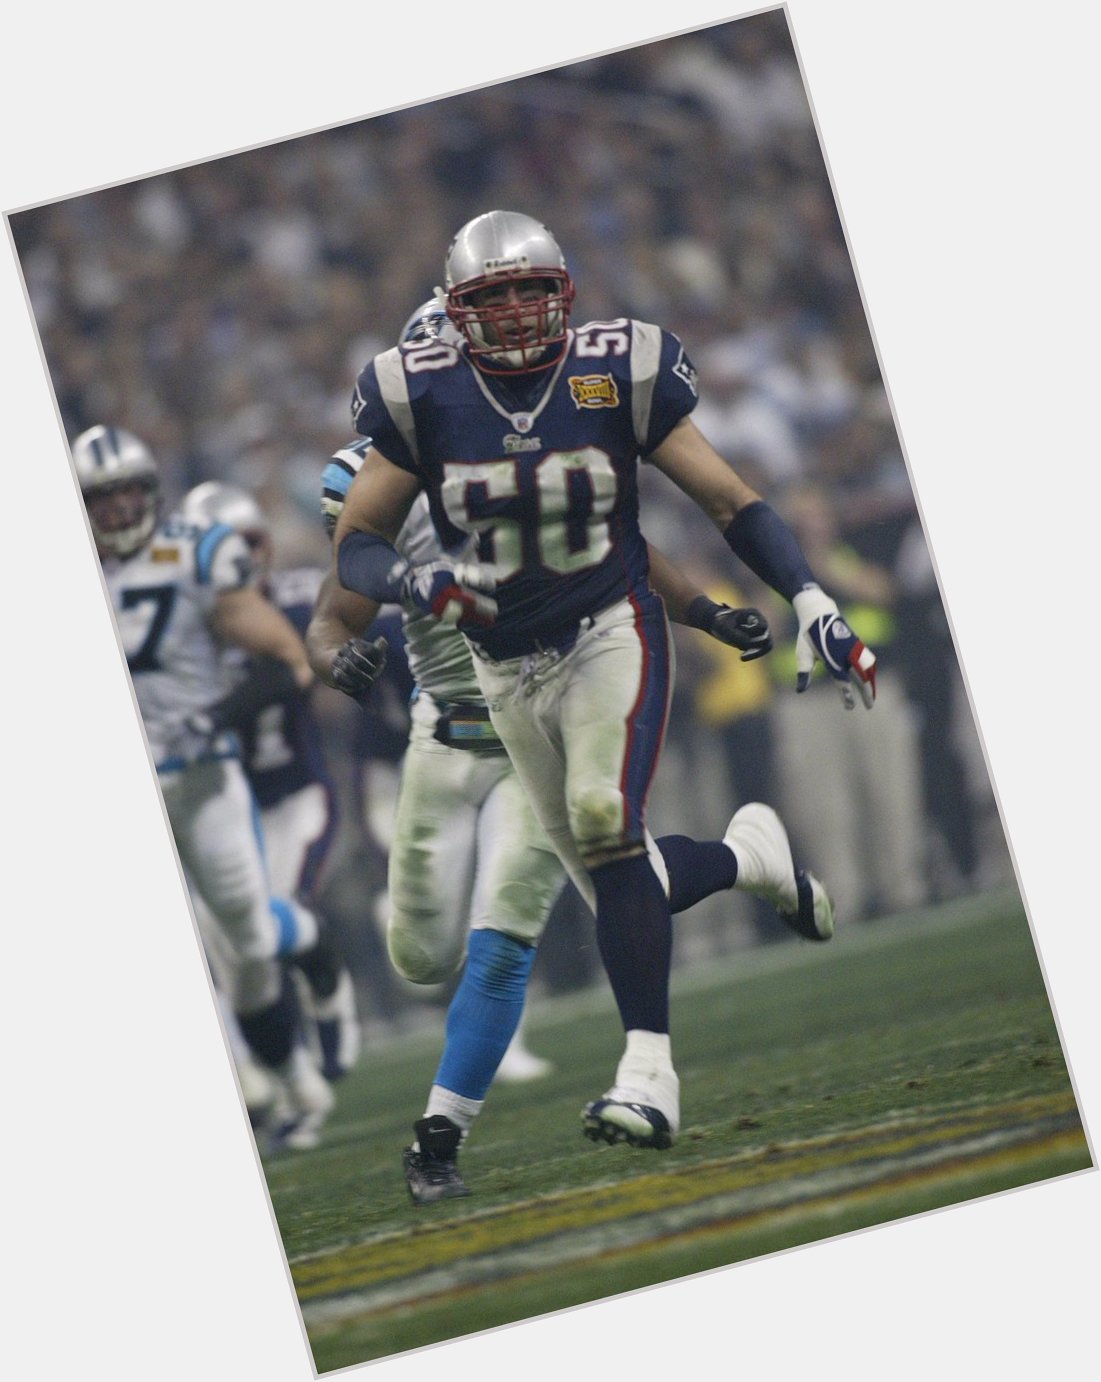 Happy birthday to New England\s own Super Bowl hero, Mike Vrabel!!! 